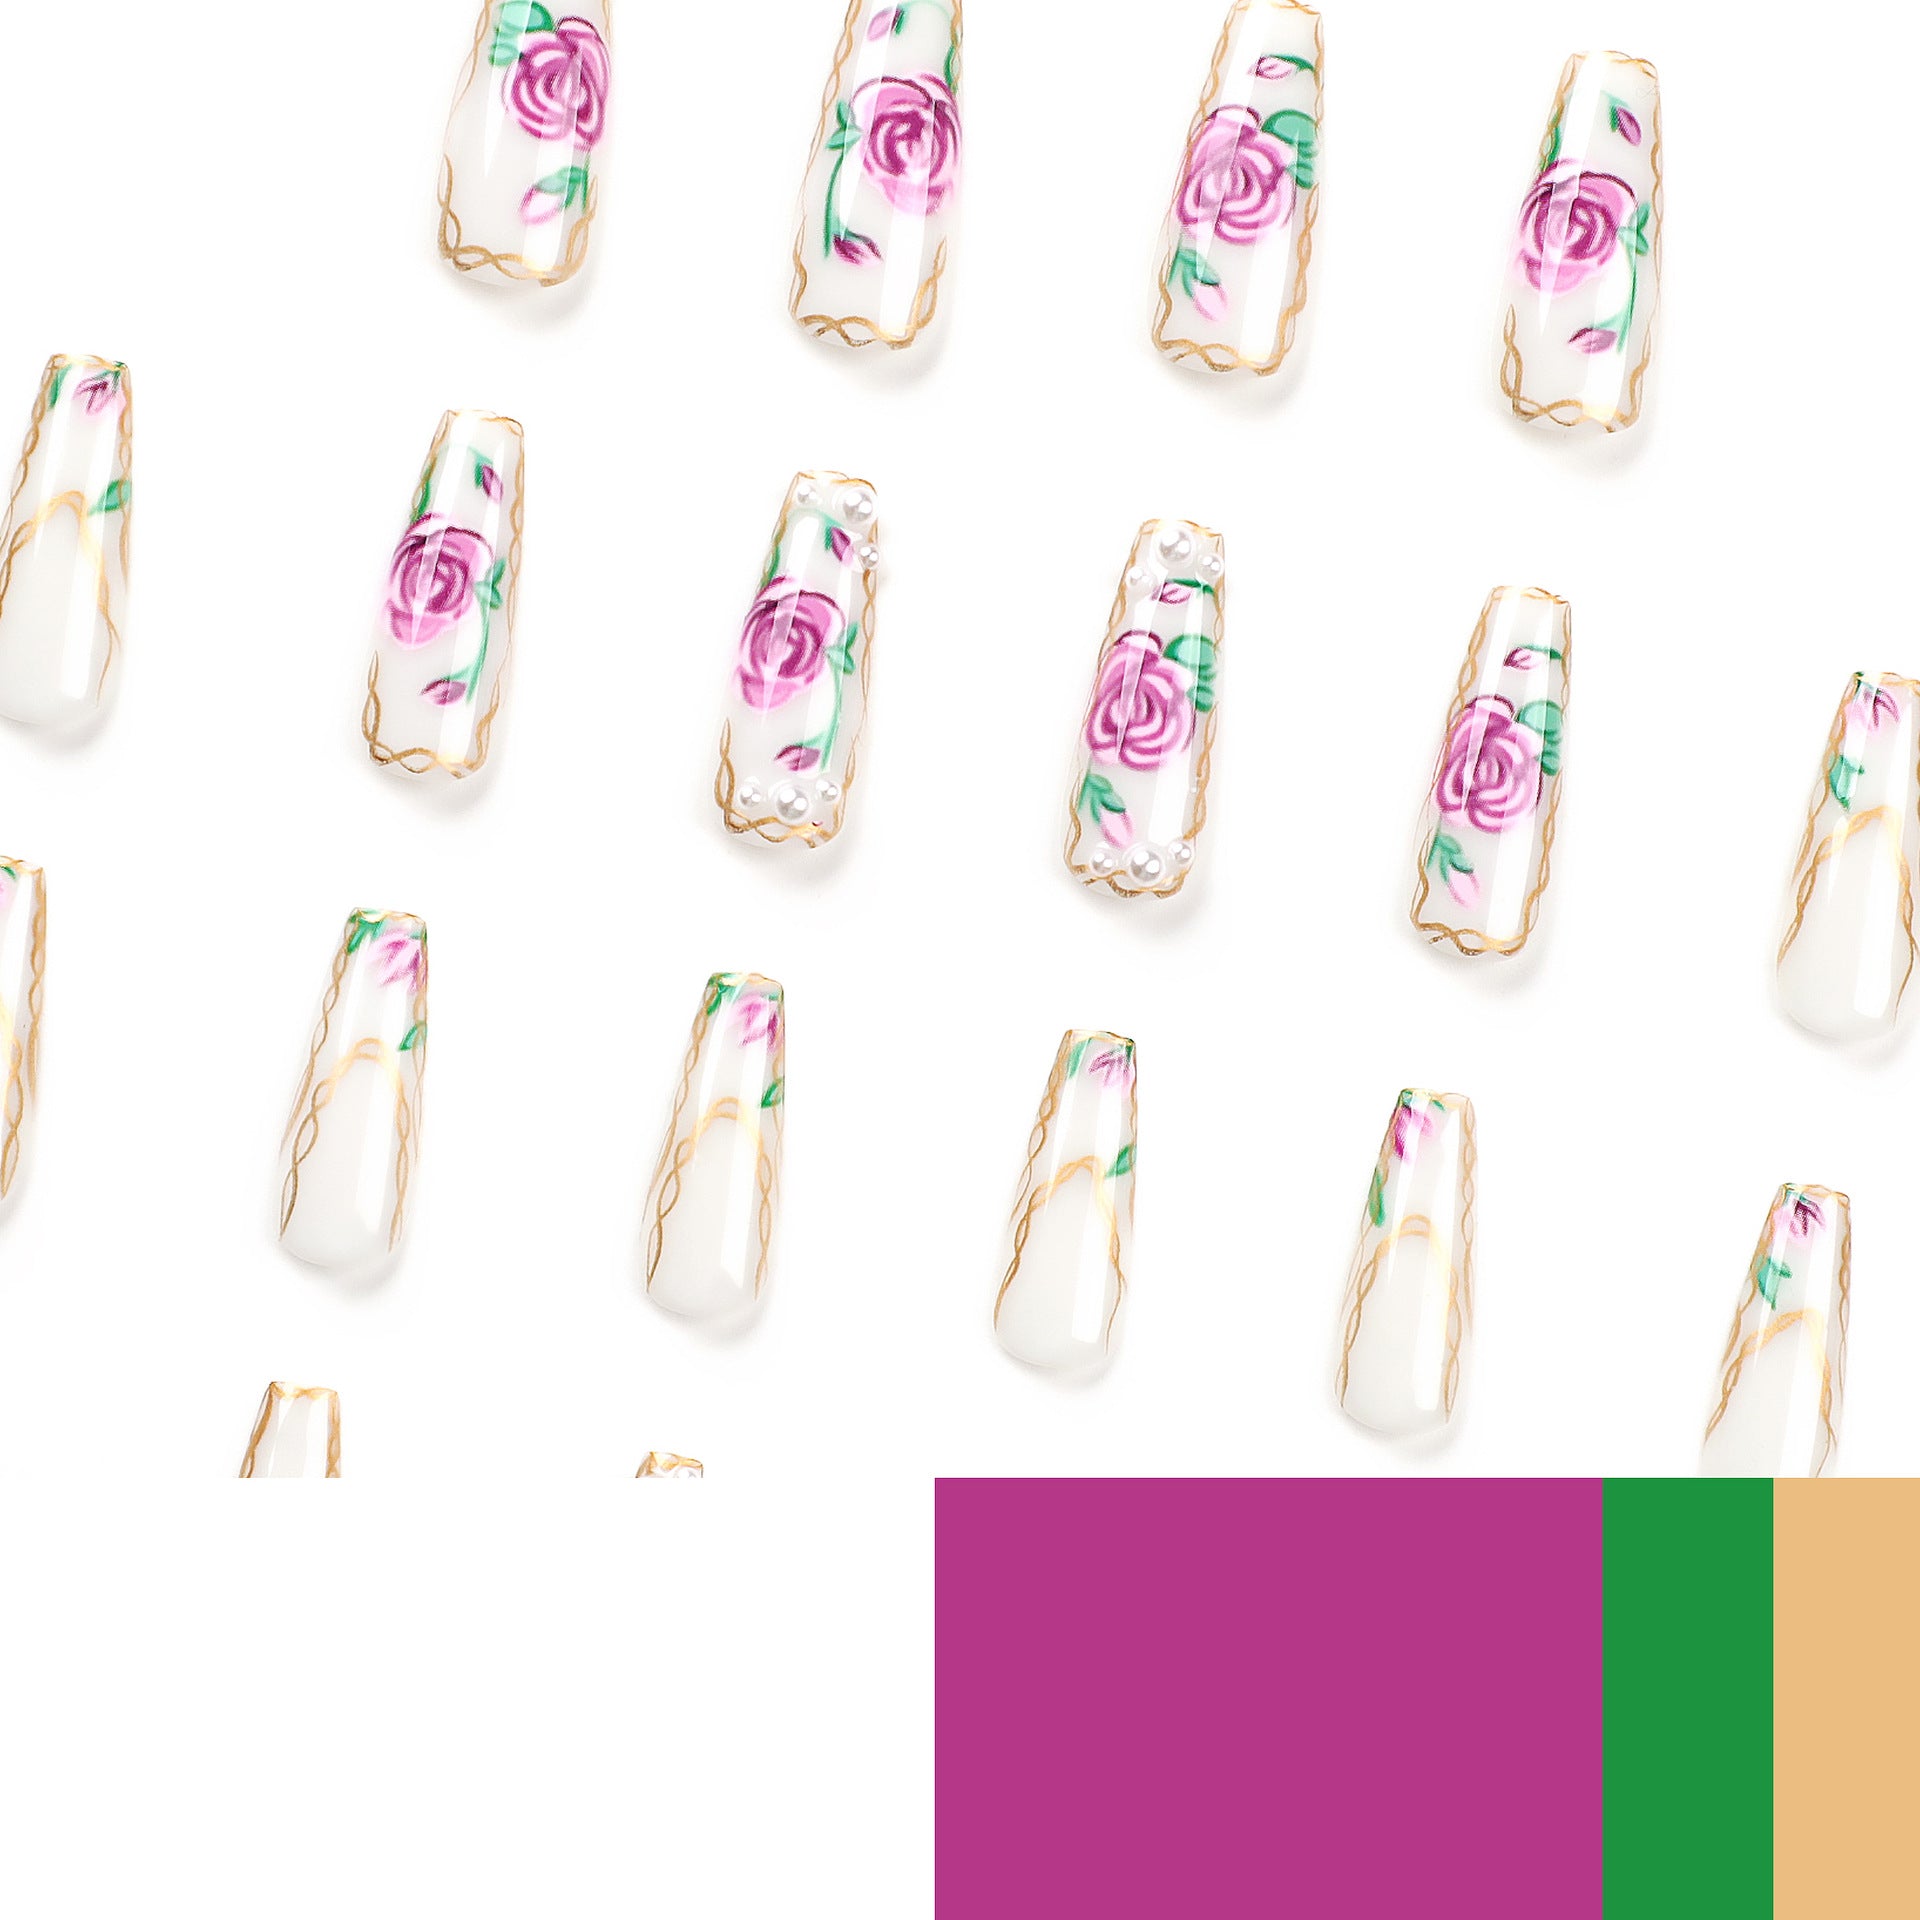 24 PCS LONG COFFIN FLOWERS PRESS ON NAILS